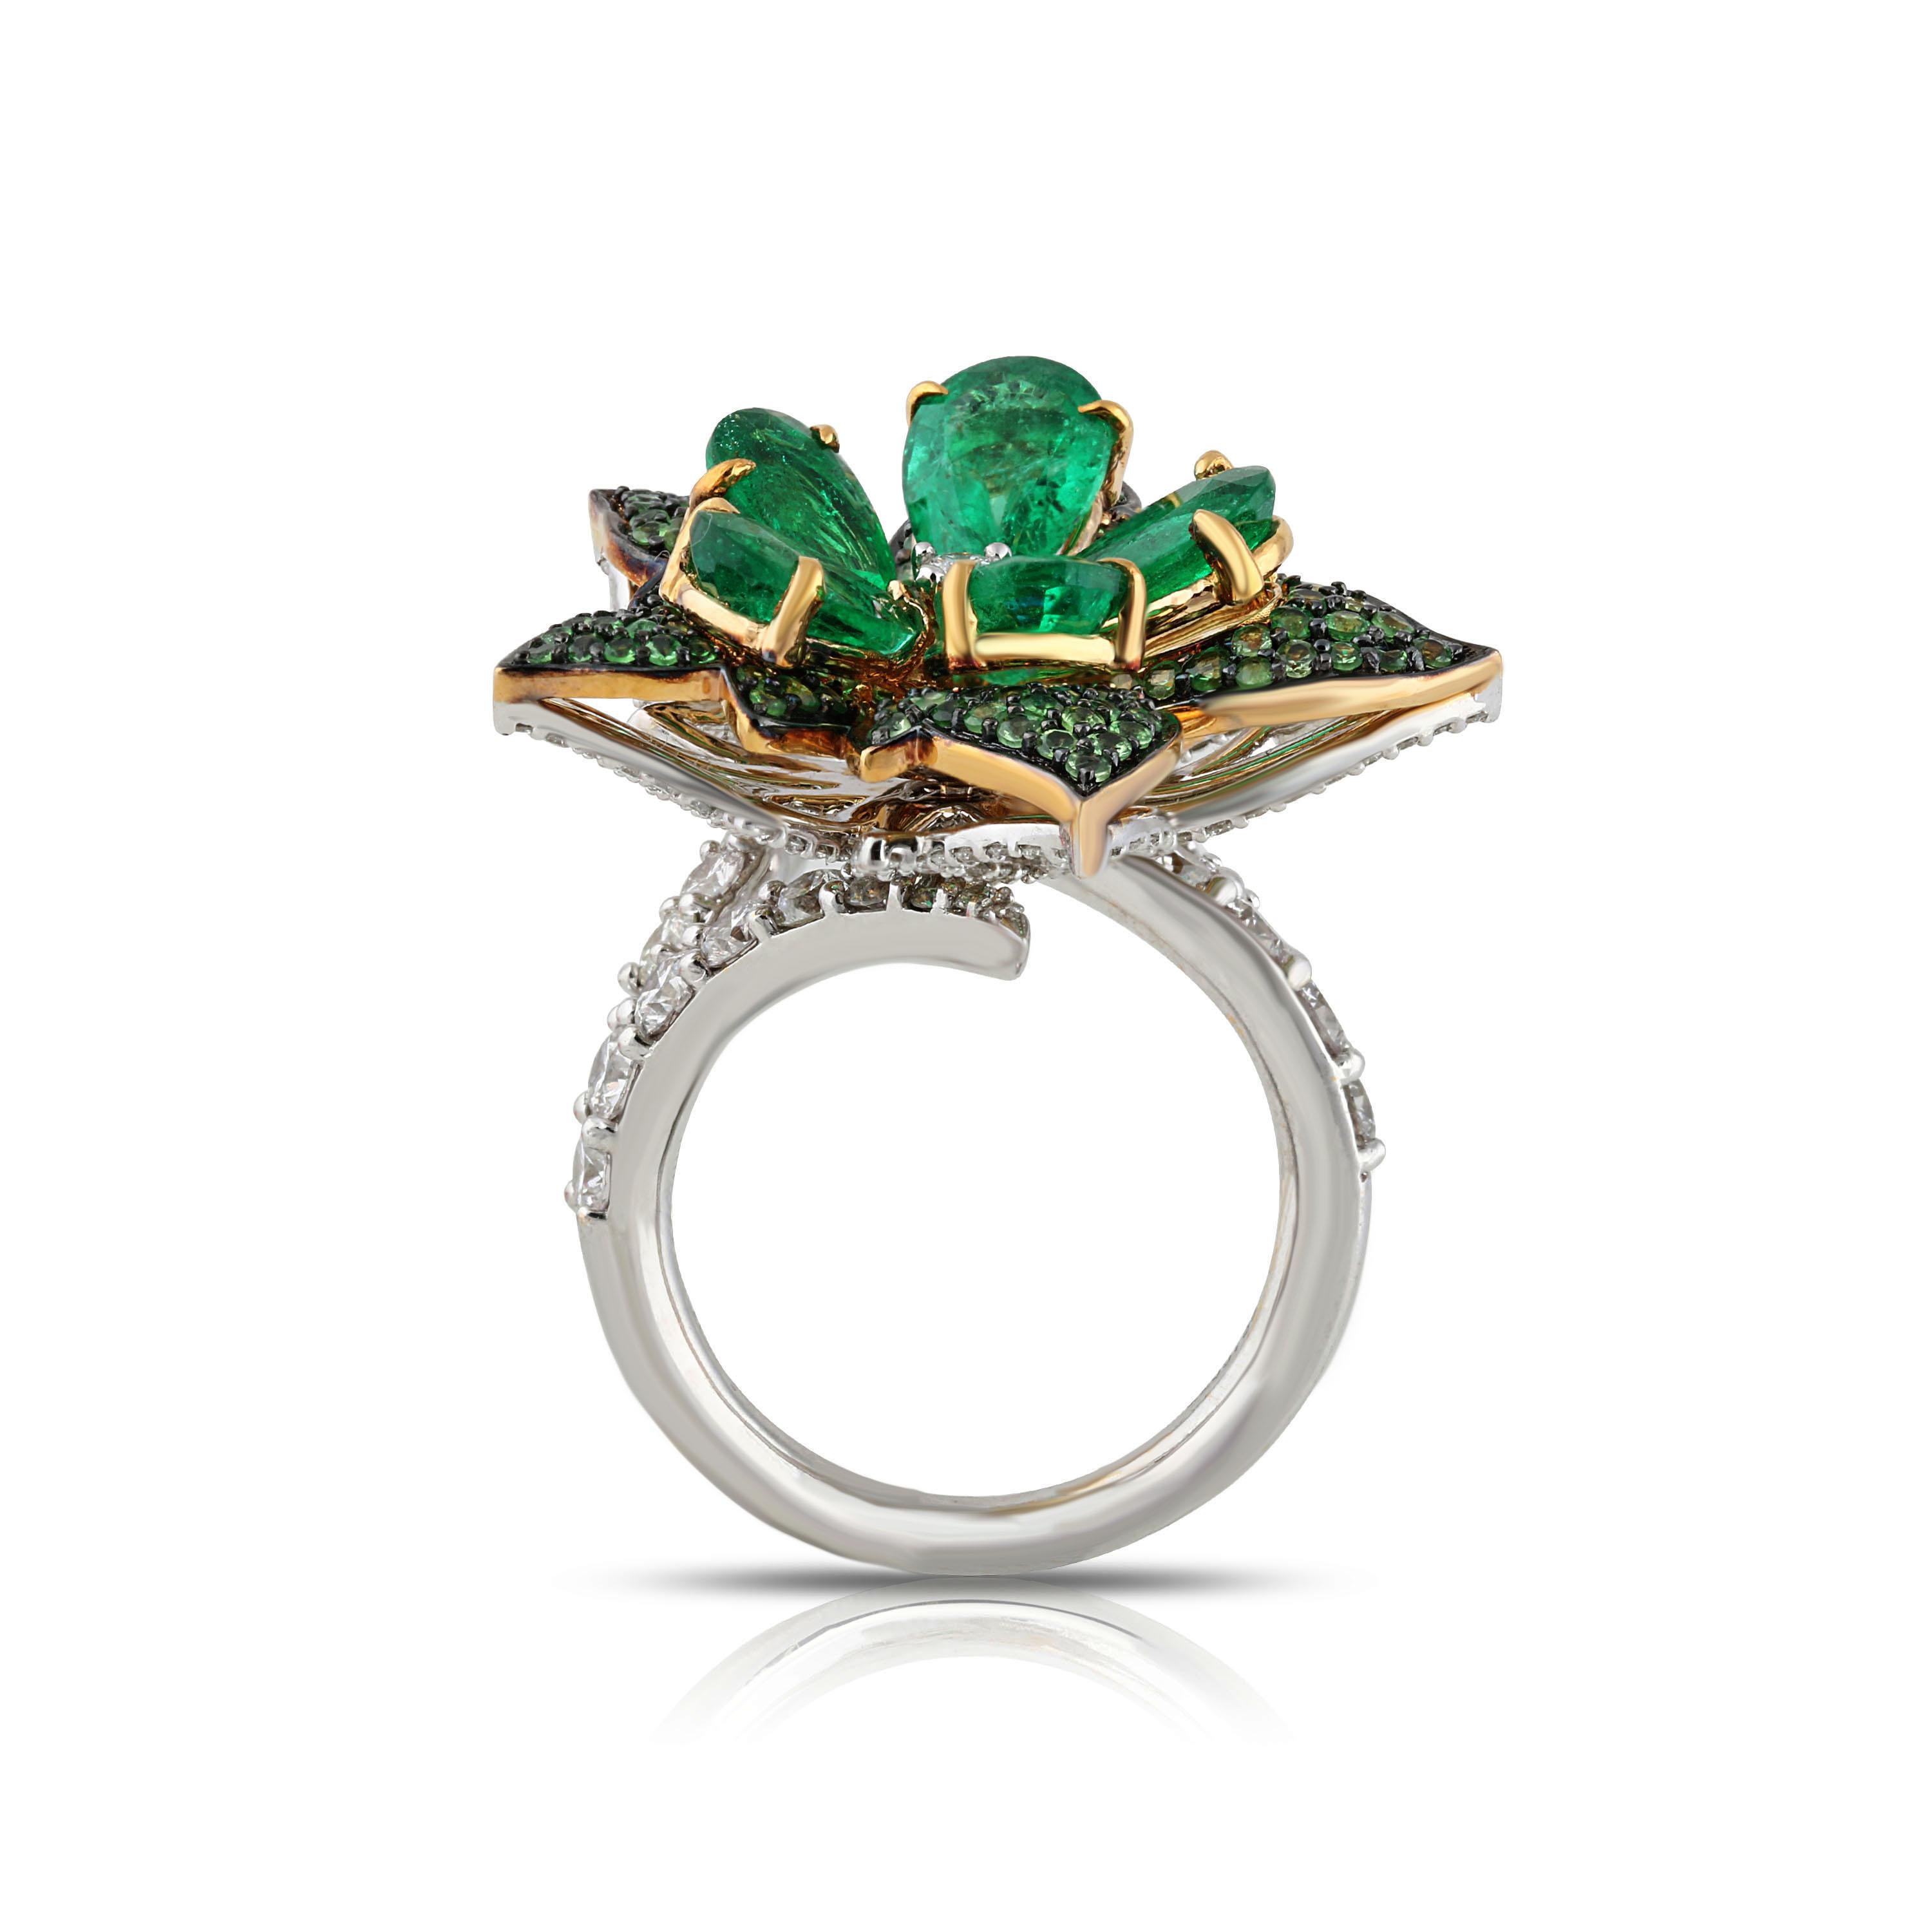 Studio Rêves Emeralds and Diamonds Floral Cocktail Ring in 18 Karat Gold In New Condition For Sale In Mumbai, Maharashtra